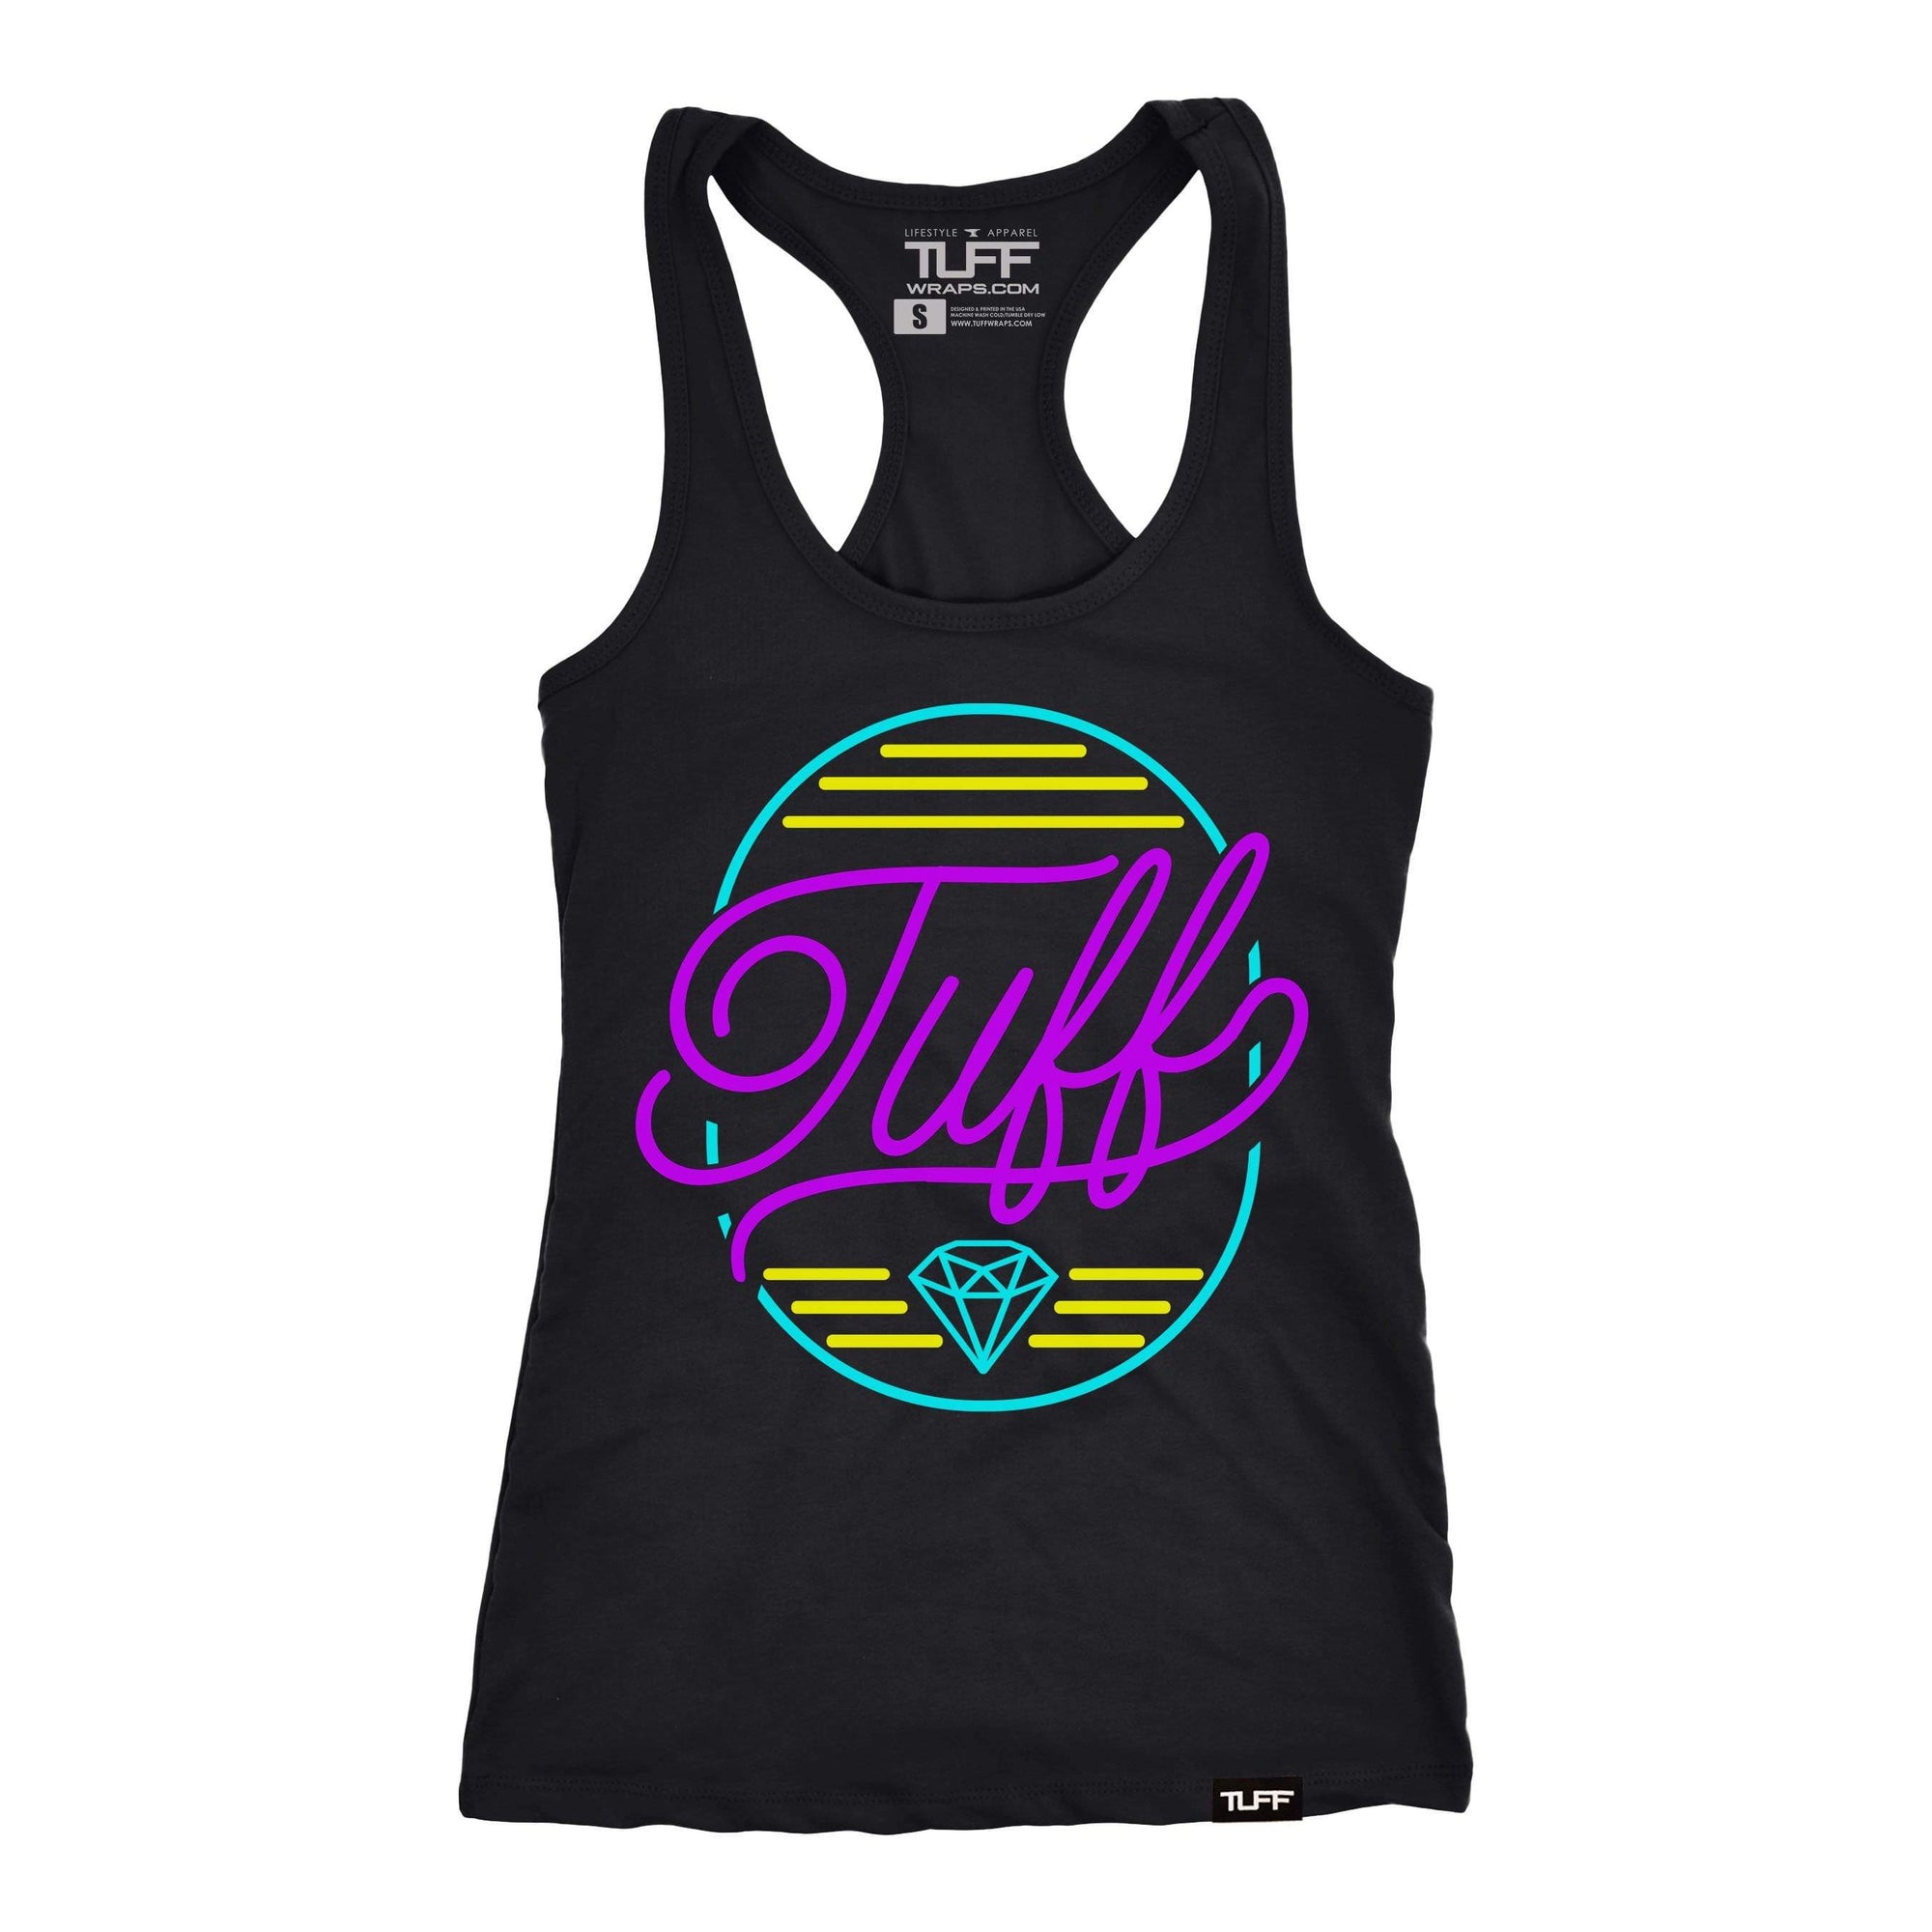 Women's Workout, CrossFit, & Weightlifting Tank Tops 